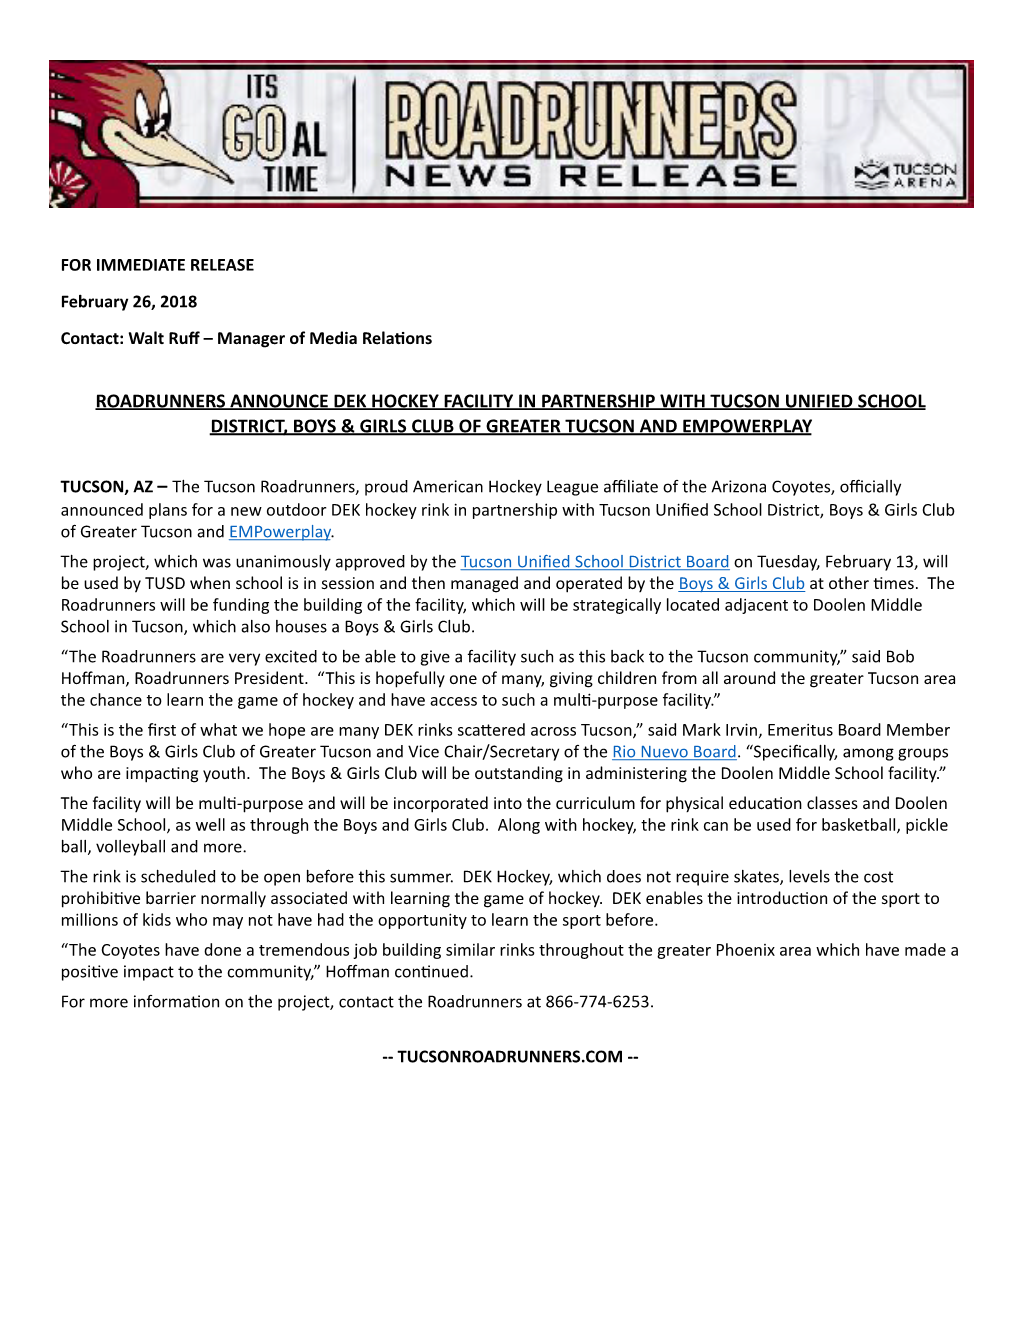 Roadrunners Announce Dek Hockey Facility in Partnership with Tucson Unified School District, Boys & Girls Club of Greater Tucson and Empowerplay